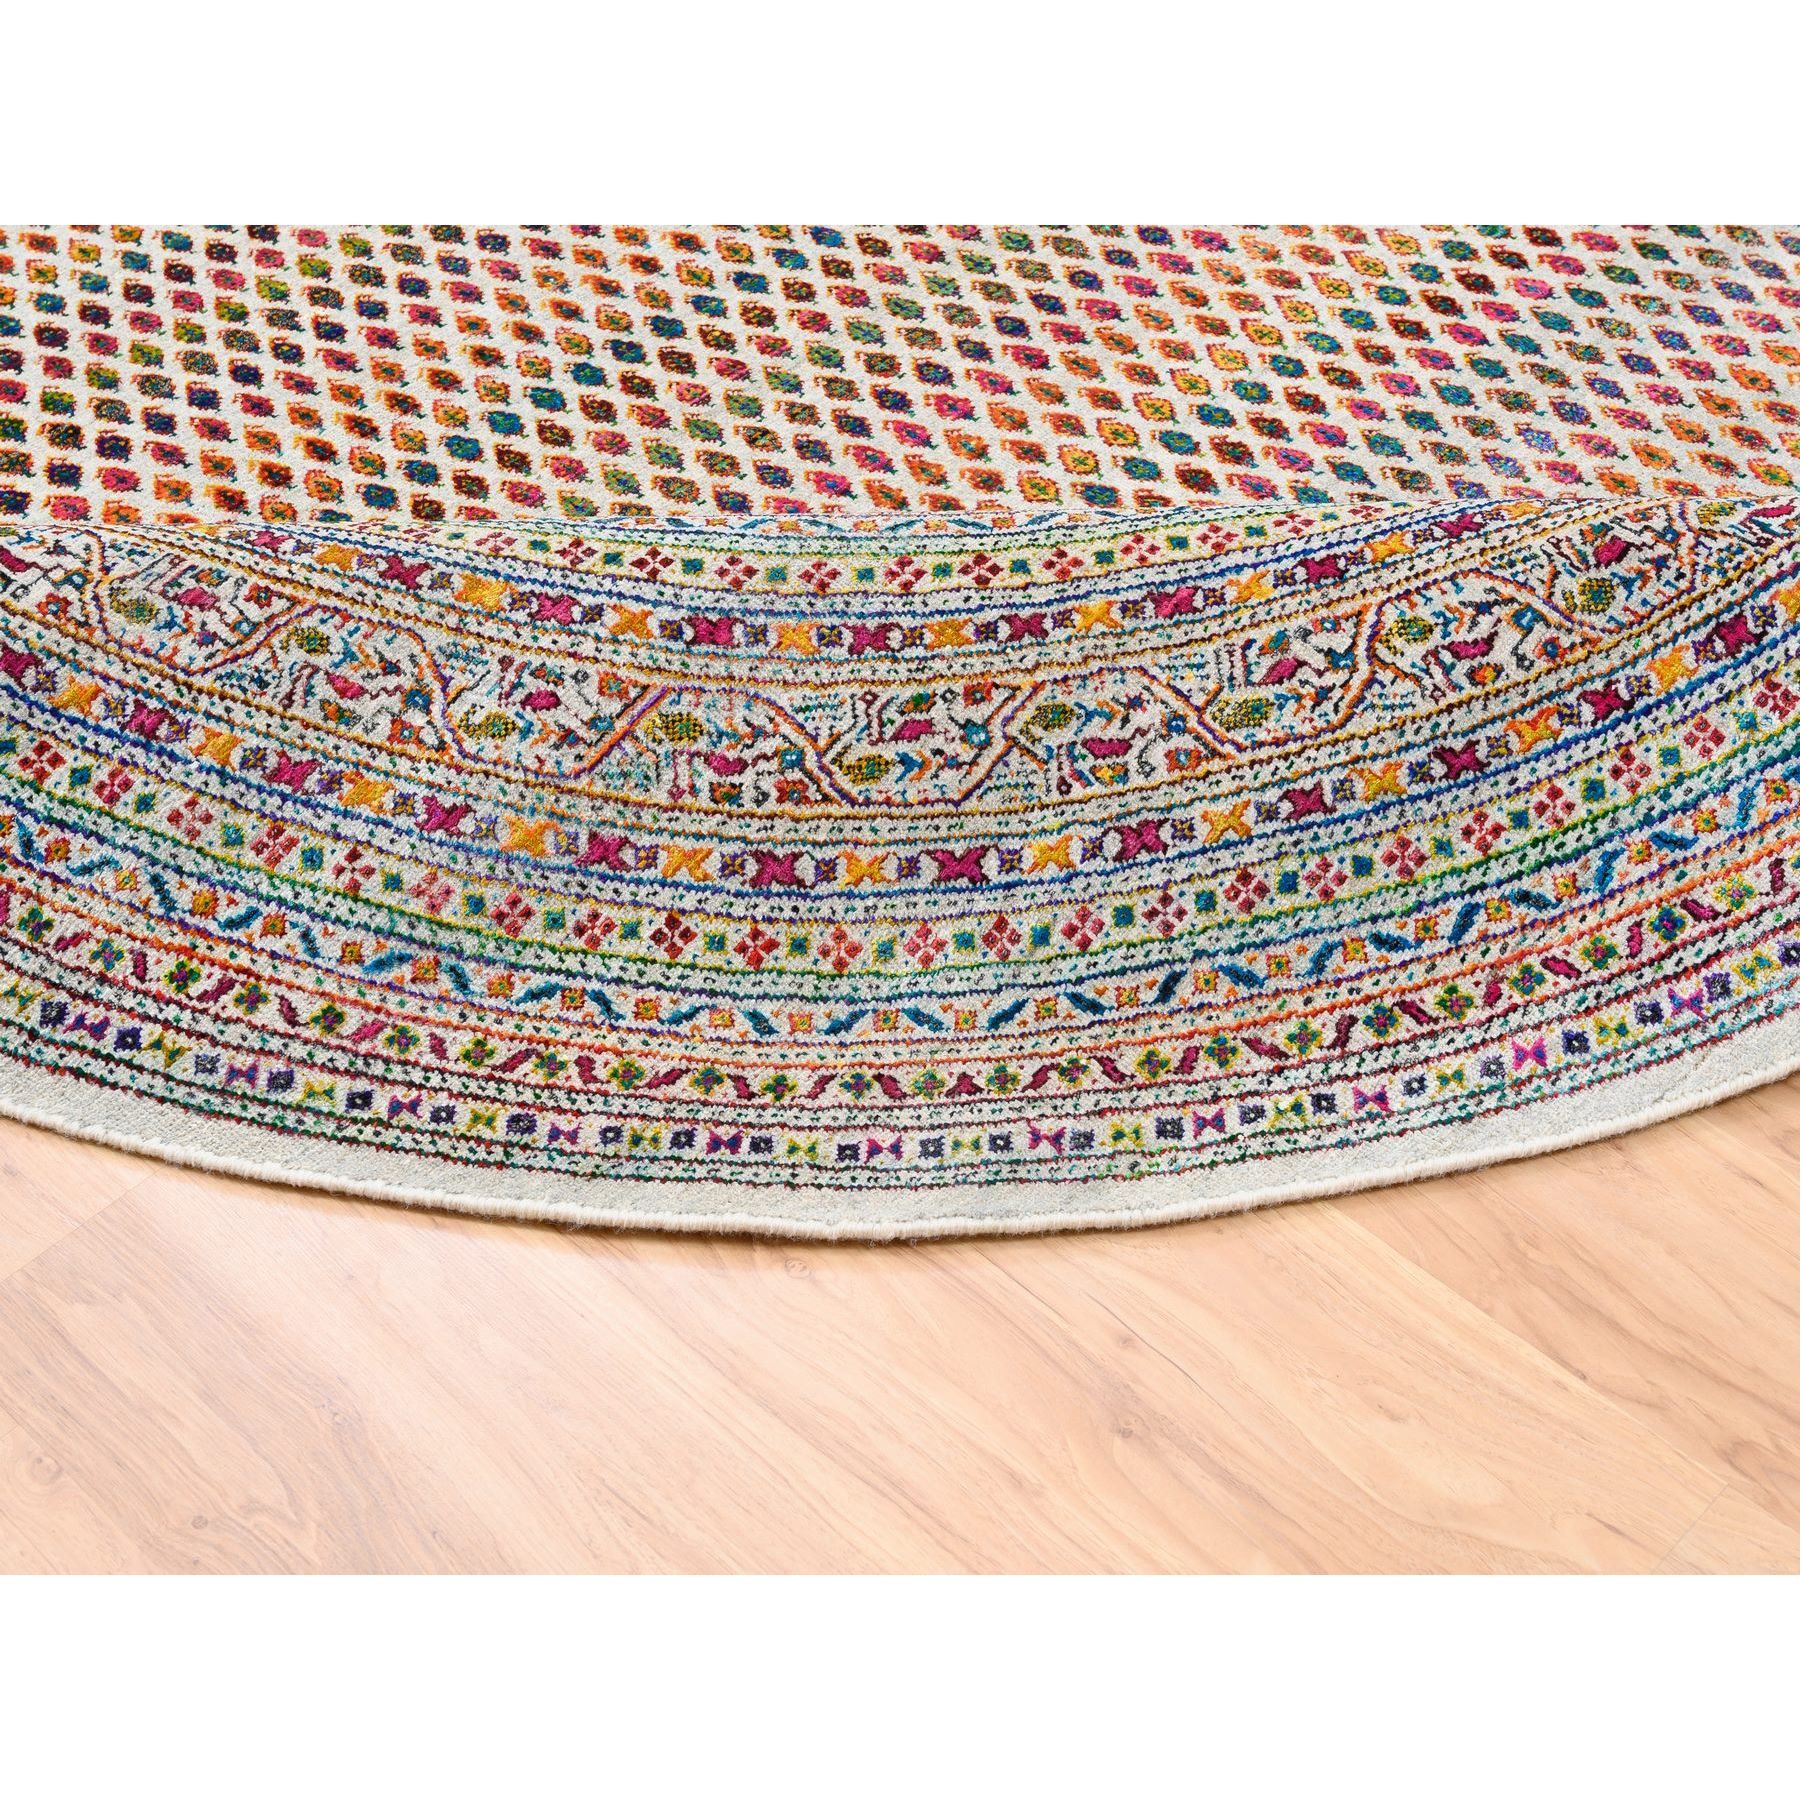 8'10"x8'10" Colorful Wool And Sari Silk Sarouk Mir Inspired With Repetitive Boteh Design Hand Woven Oriental Round Rug 